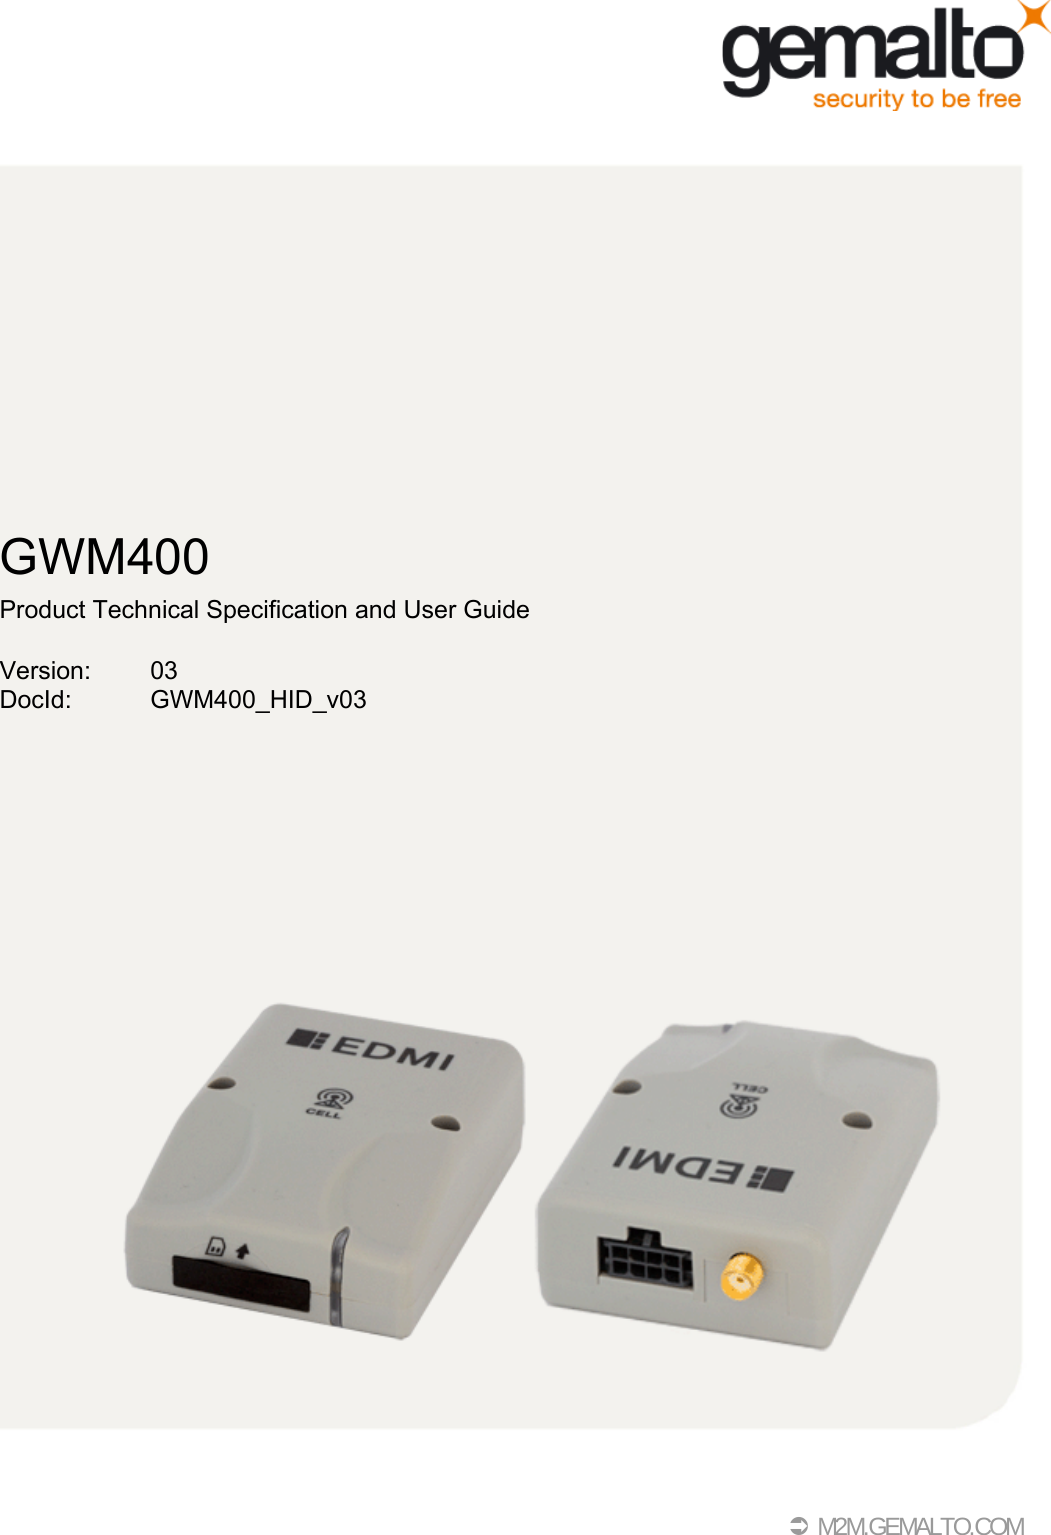  M2M.GEMALTO.COMGWM400Product Technical Specification and User GuideVersion: 03DocId: GWM400_HID_v03